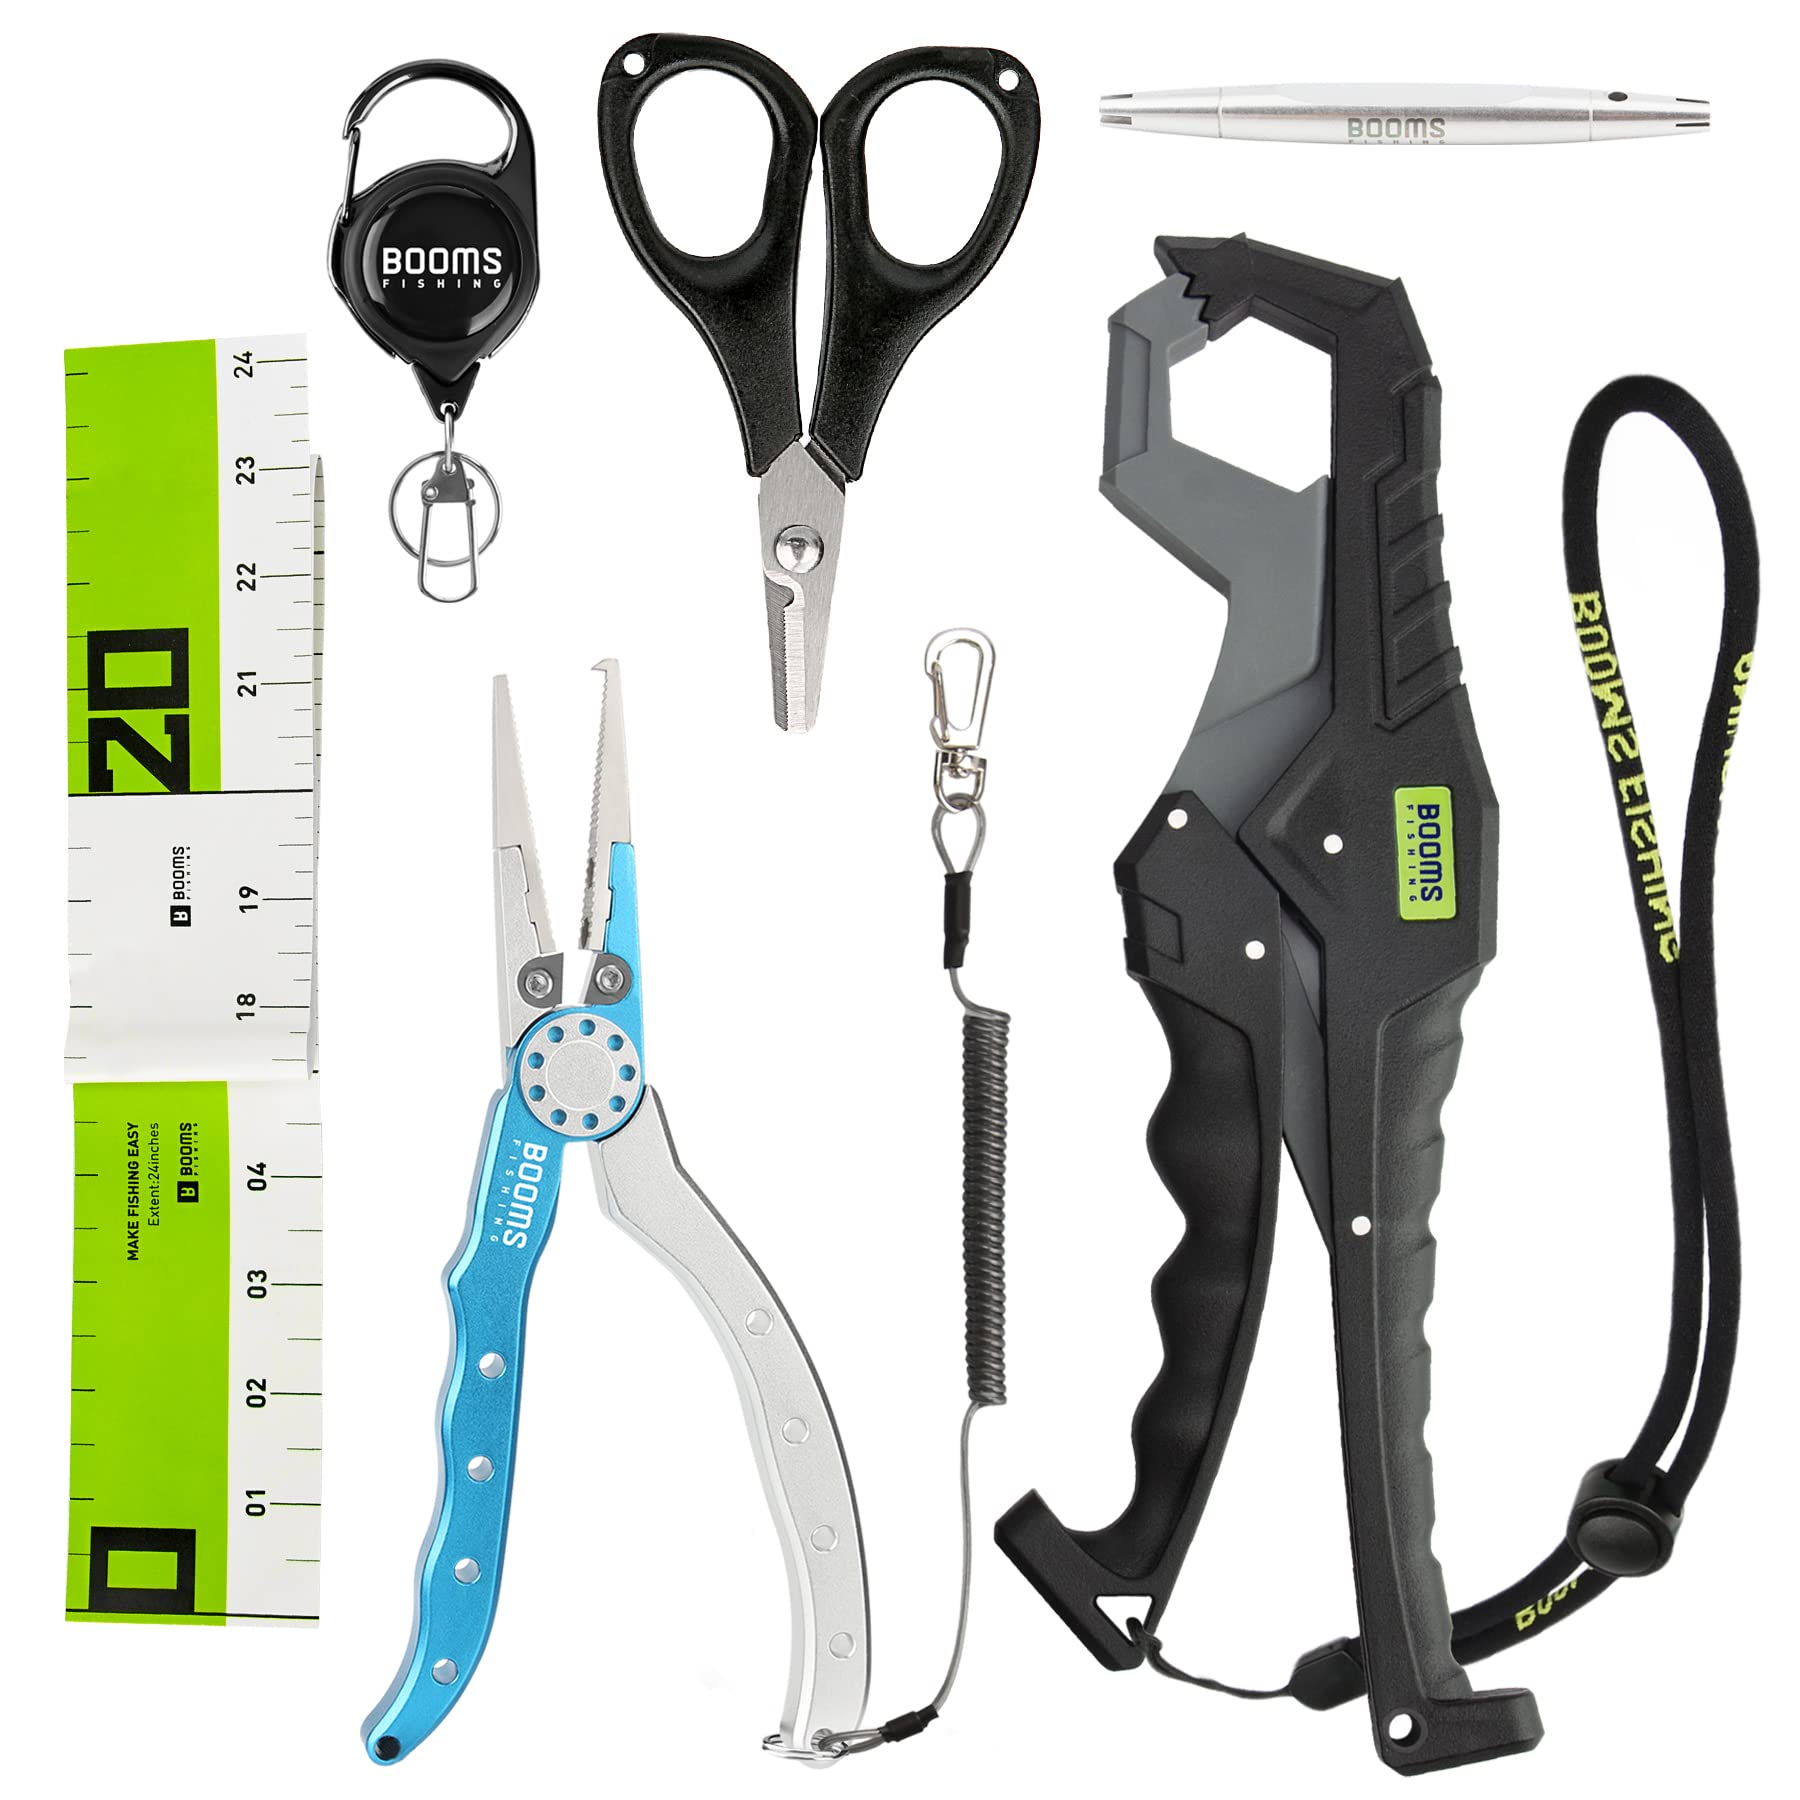 Booms Fishing TK6 7PC Fishing Tools Set, 7.5 Aluminum Fishing Pliers and  Fish Gripper Combo, Saltwater Fishing Accessories and Equipment, Great  Fishing Gifts for Men